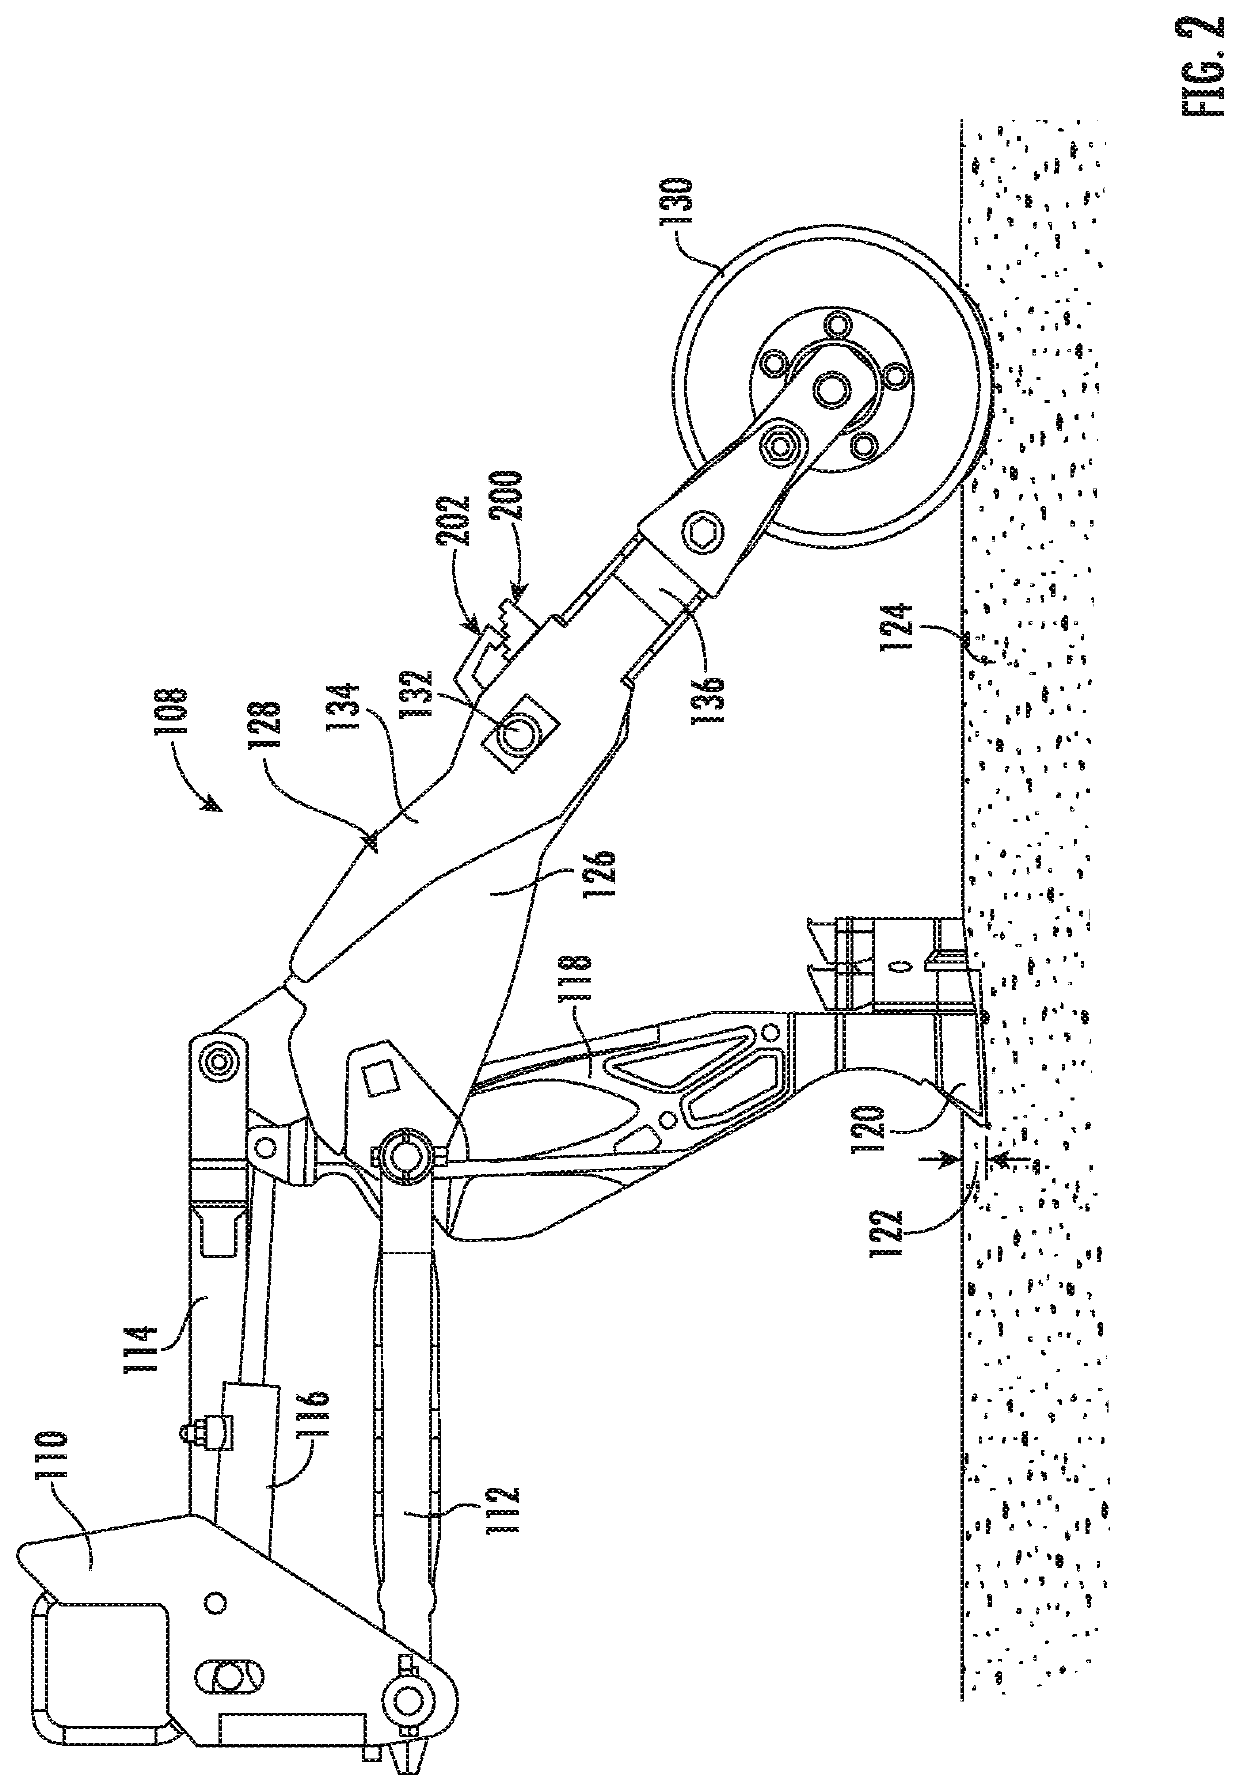 Depth adjustment features for a seed planting unit of an agricultural implement